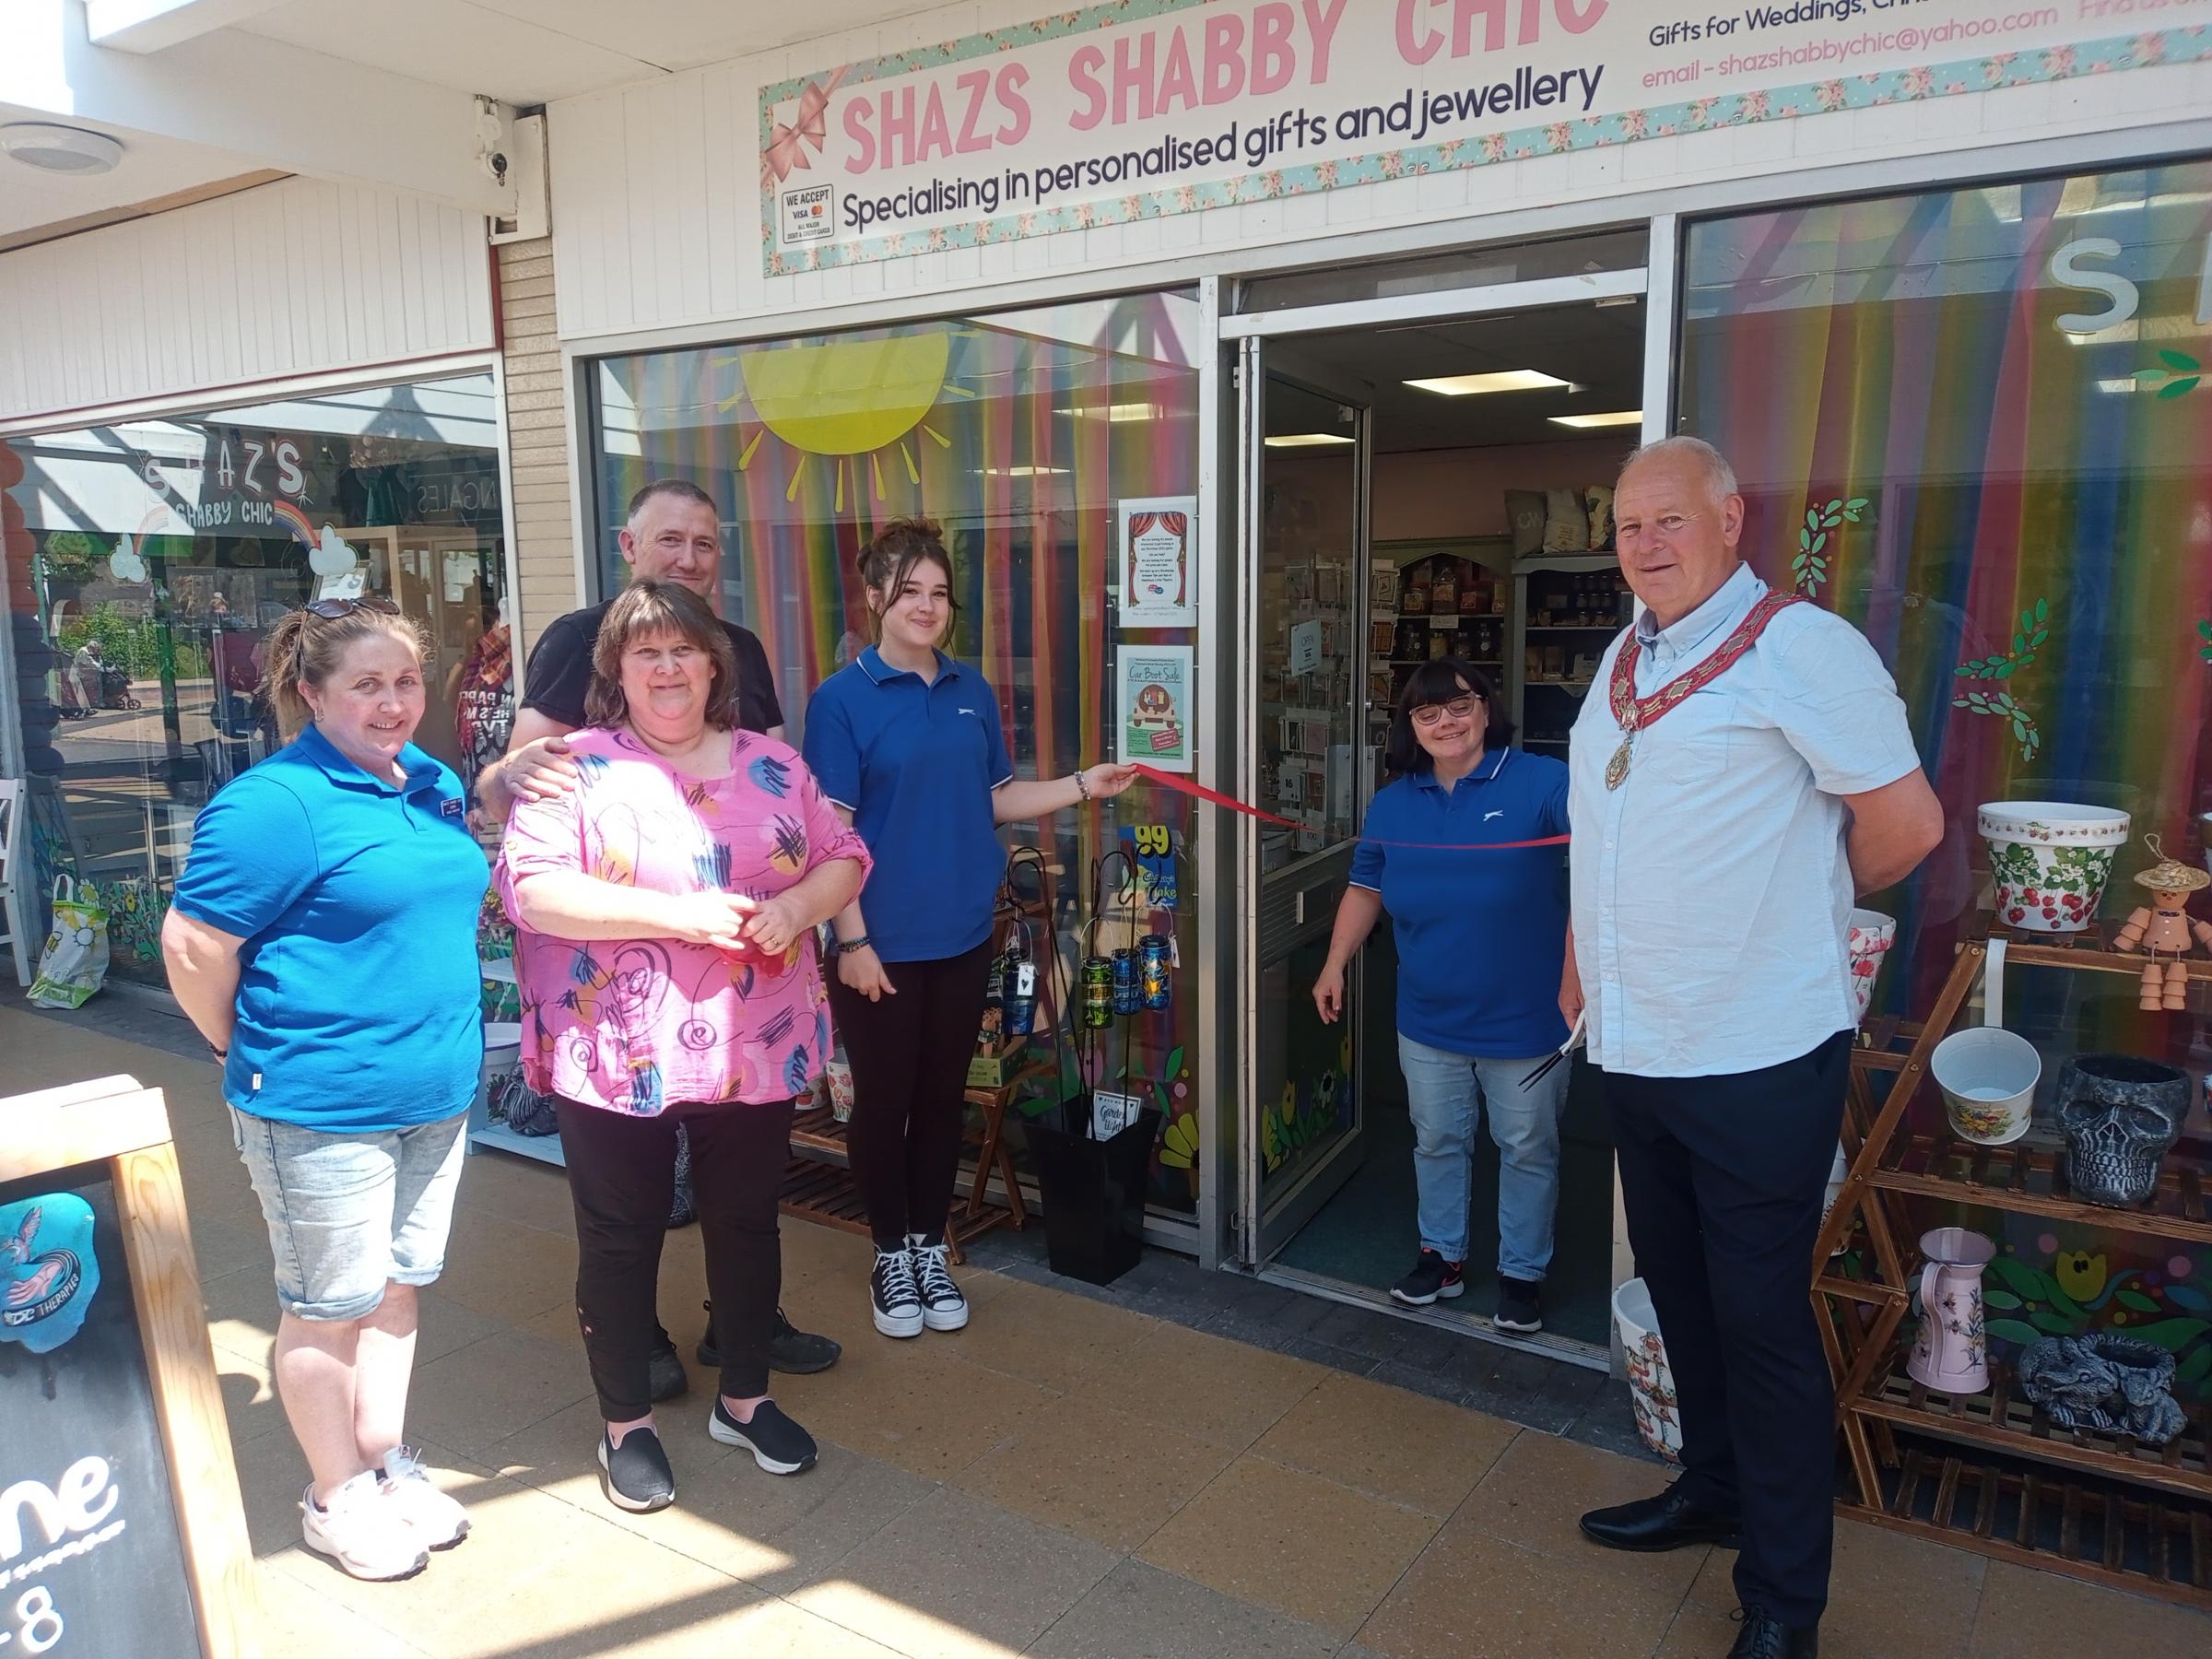 Shazs Shabby Chic is opened in Buckley Shopping Cenre, with, from left: Cerys Walter, Sharon Beck, Martin Beck, Tegan Evans, Kay Rathbone and Cllr Charles Cordery.